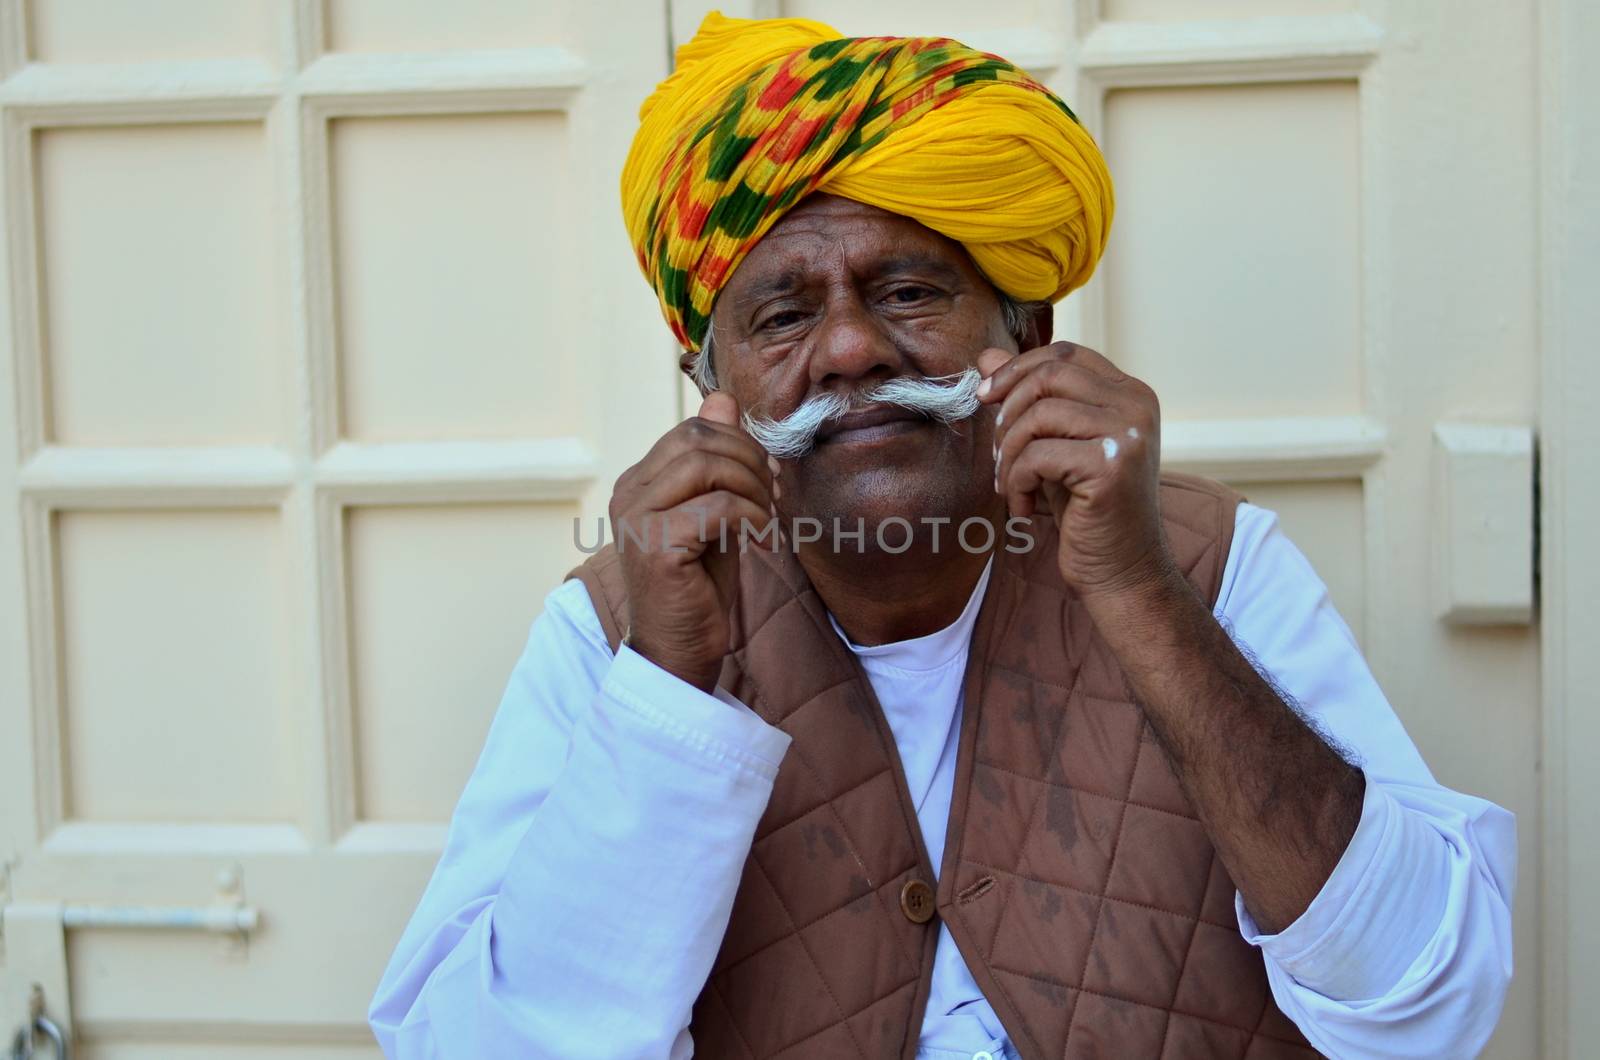 Jodhpur, Rajasthan, India, circa 2020. An old man cum gatekeeper wearing a yellow colorful turban showing off his mustache at the Mehrangarh Fort. by jayantbahel